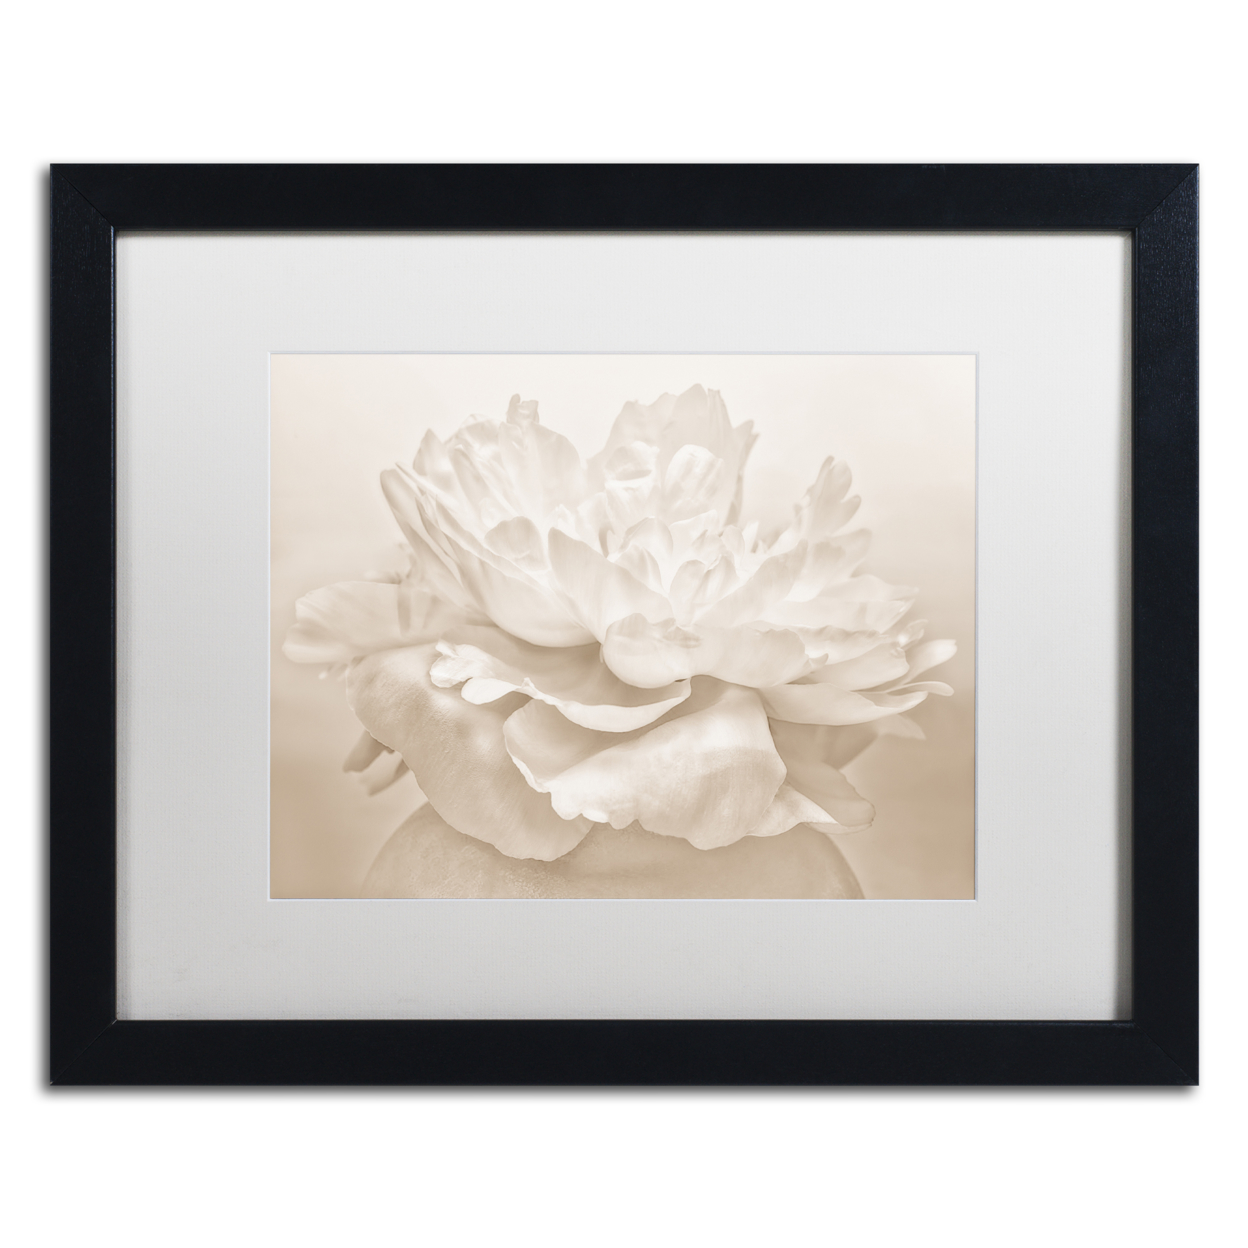 Cora Niele 'White Peony' Black Wooden Framed Art 18 X 22 Inches